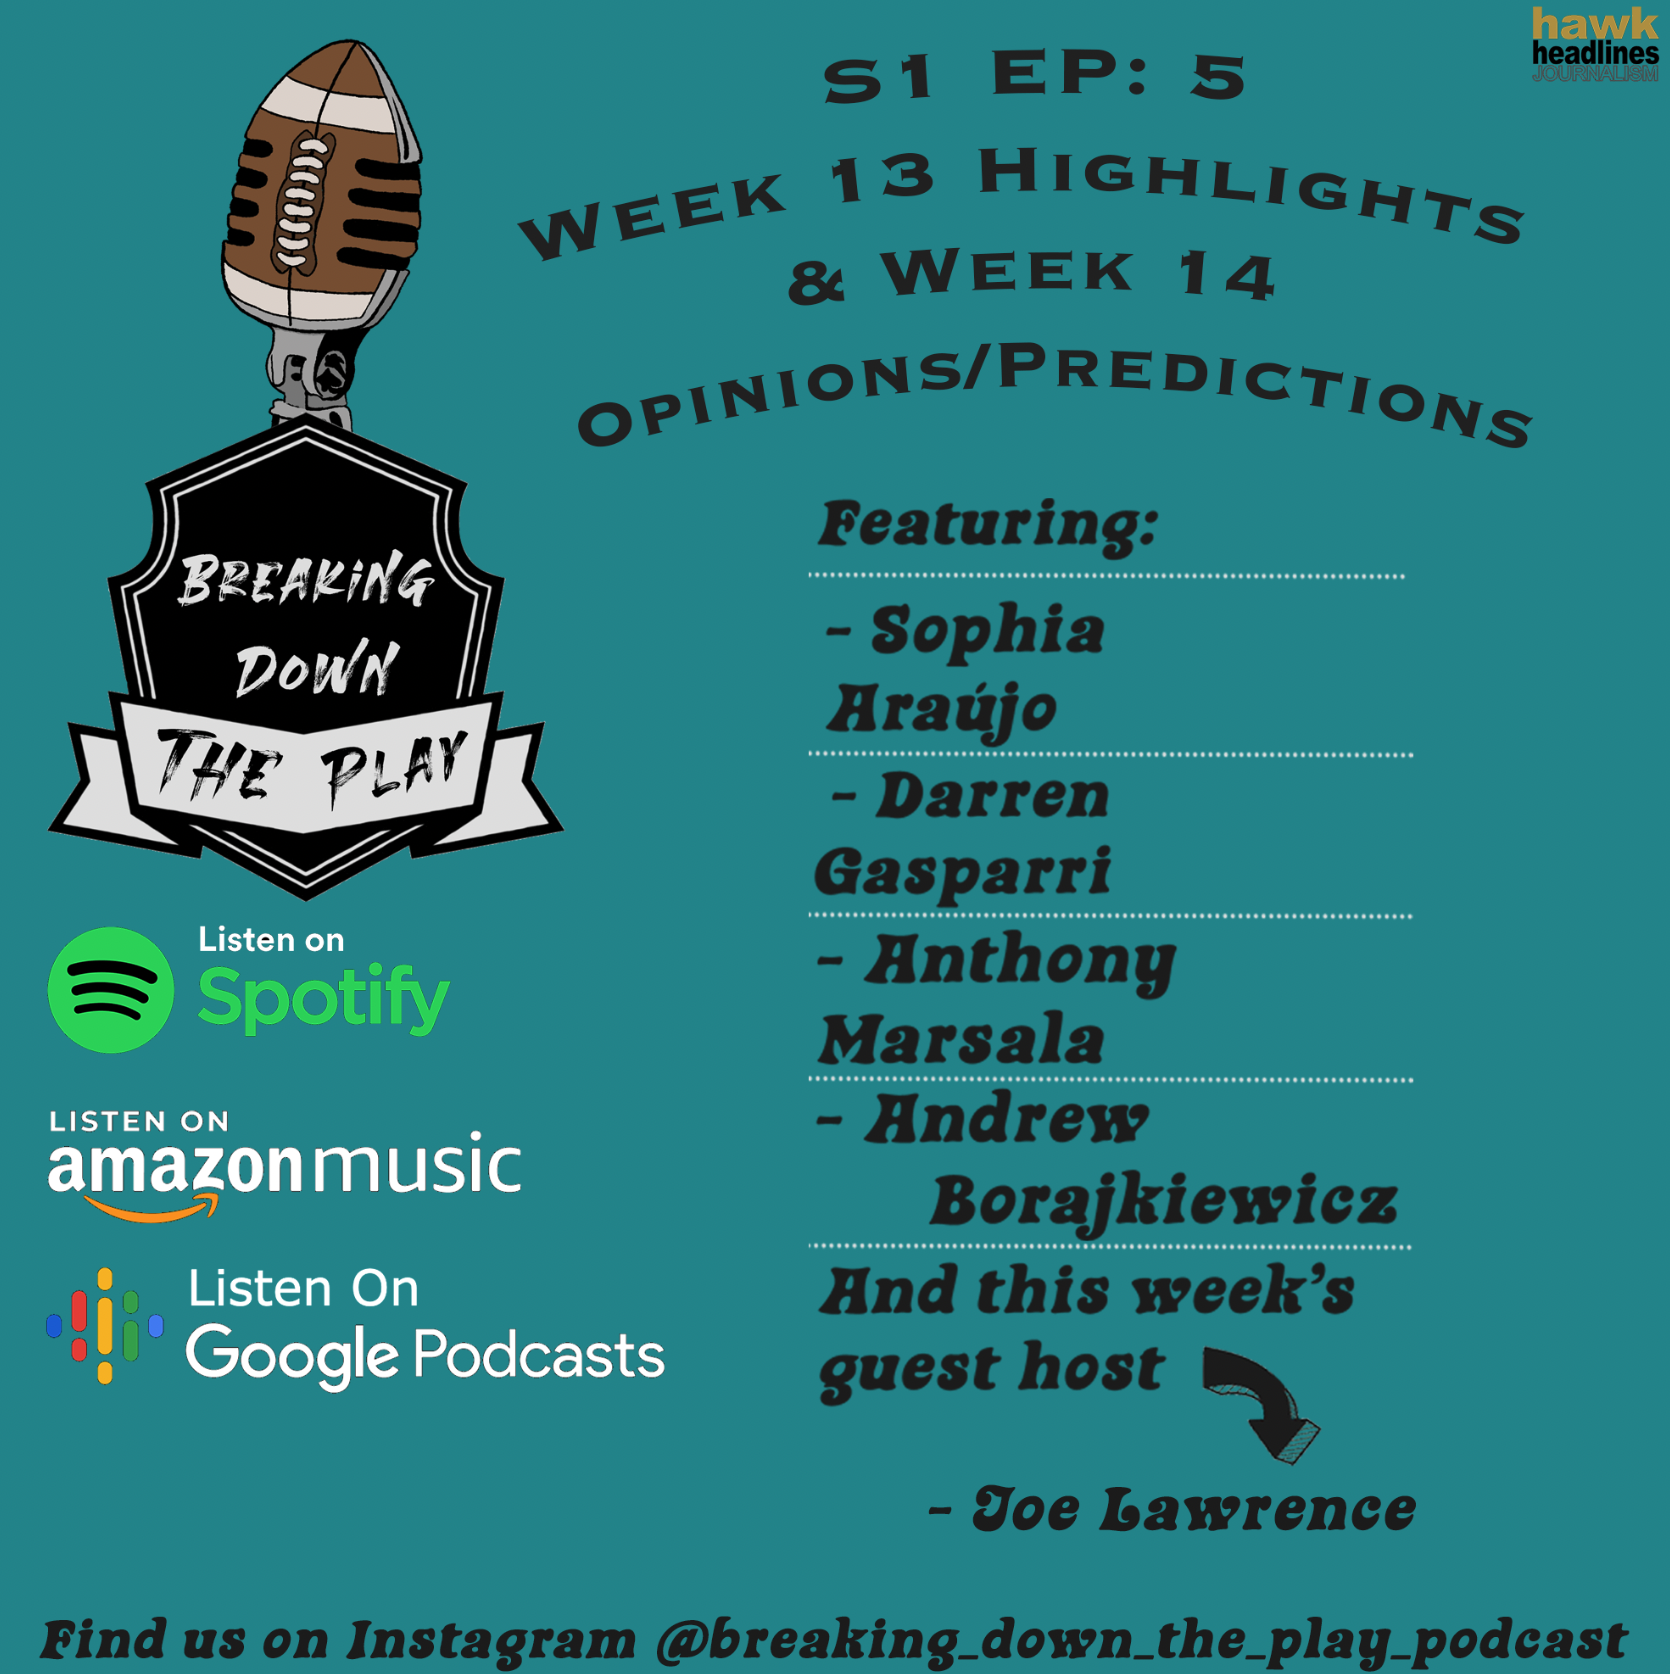 PODCAST:: NFL Highlights, Opinions and Predictions, Episode 5